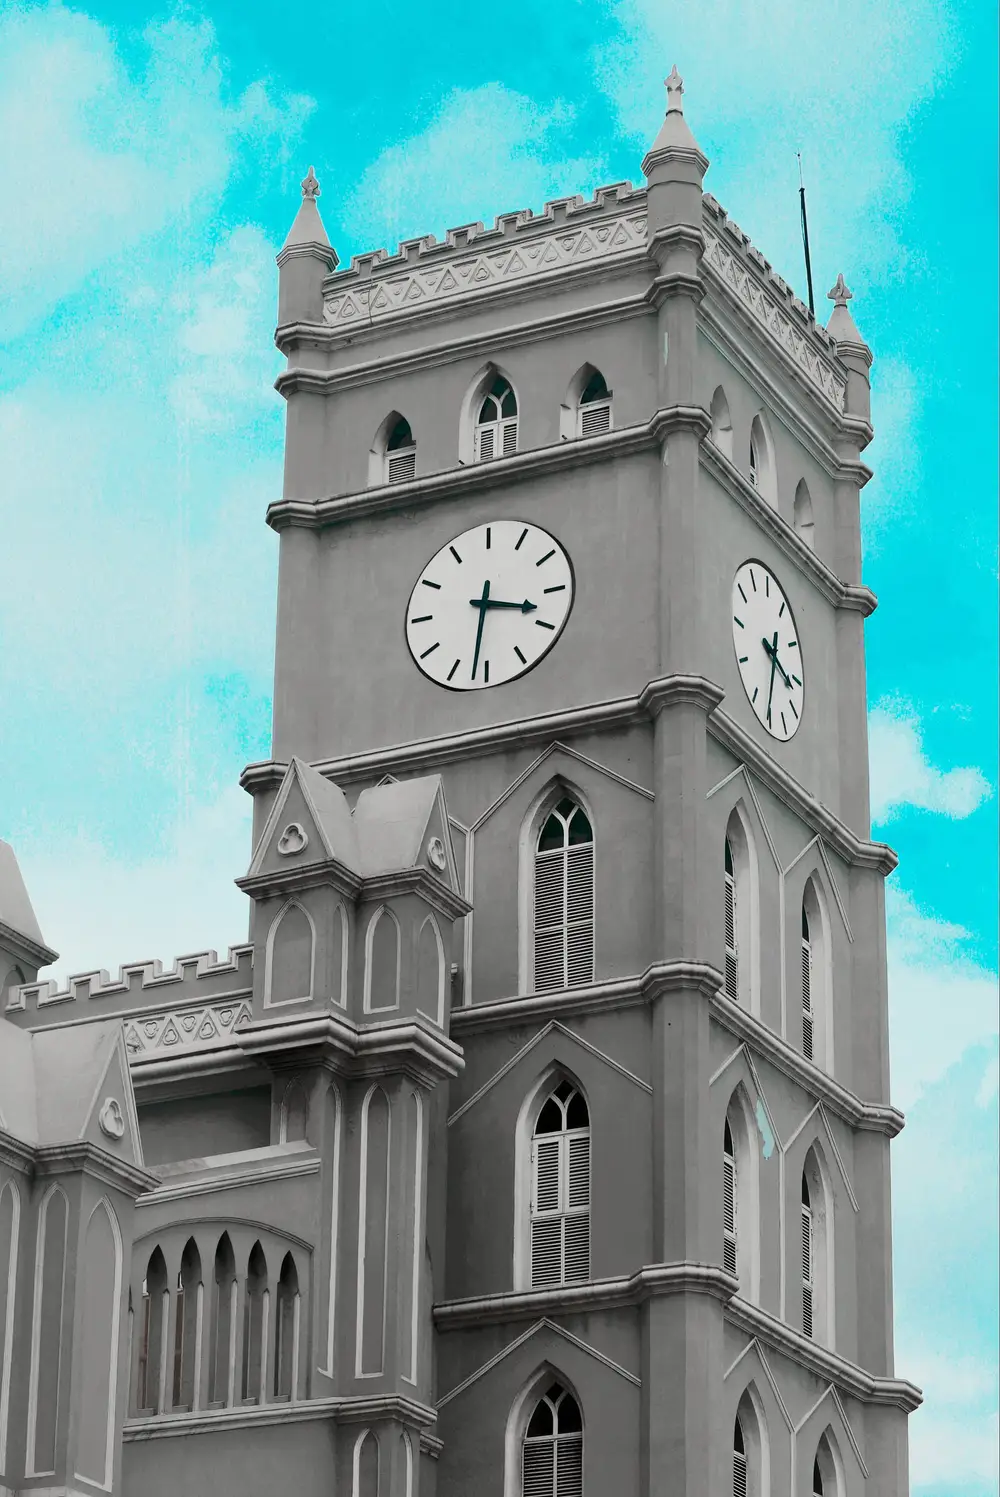 The Cathedral Church of Christ, Marina Lagos. Built in 1946